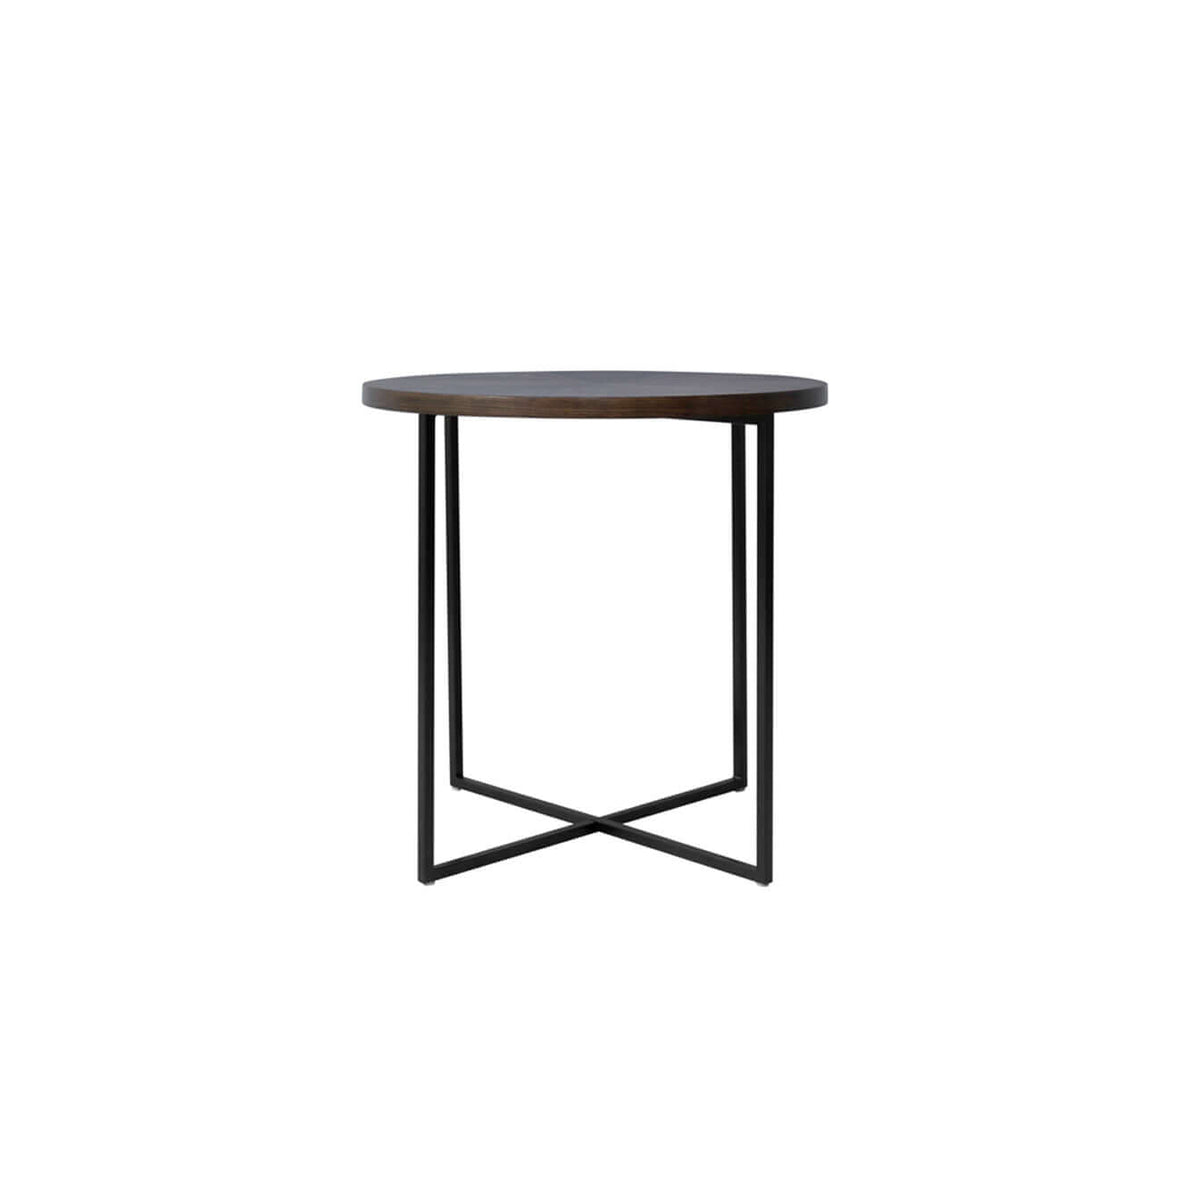 new and contemporary Soho round side table